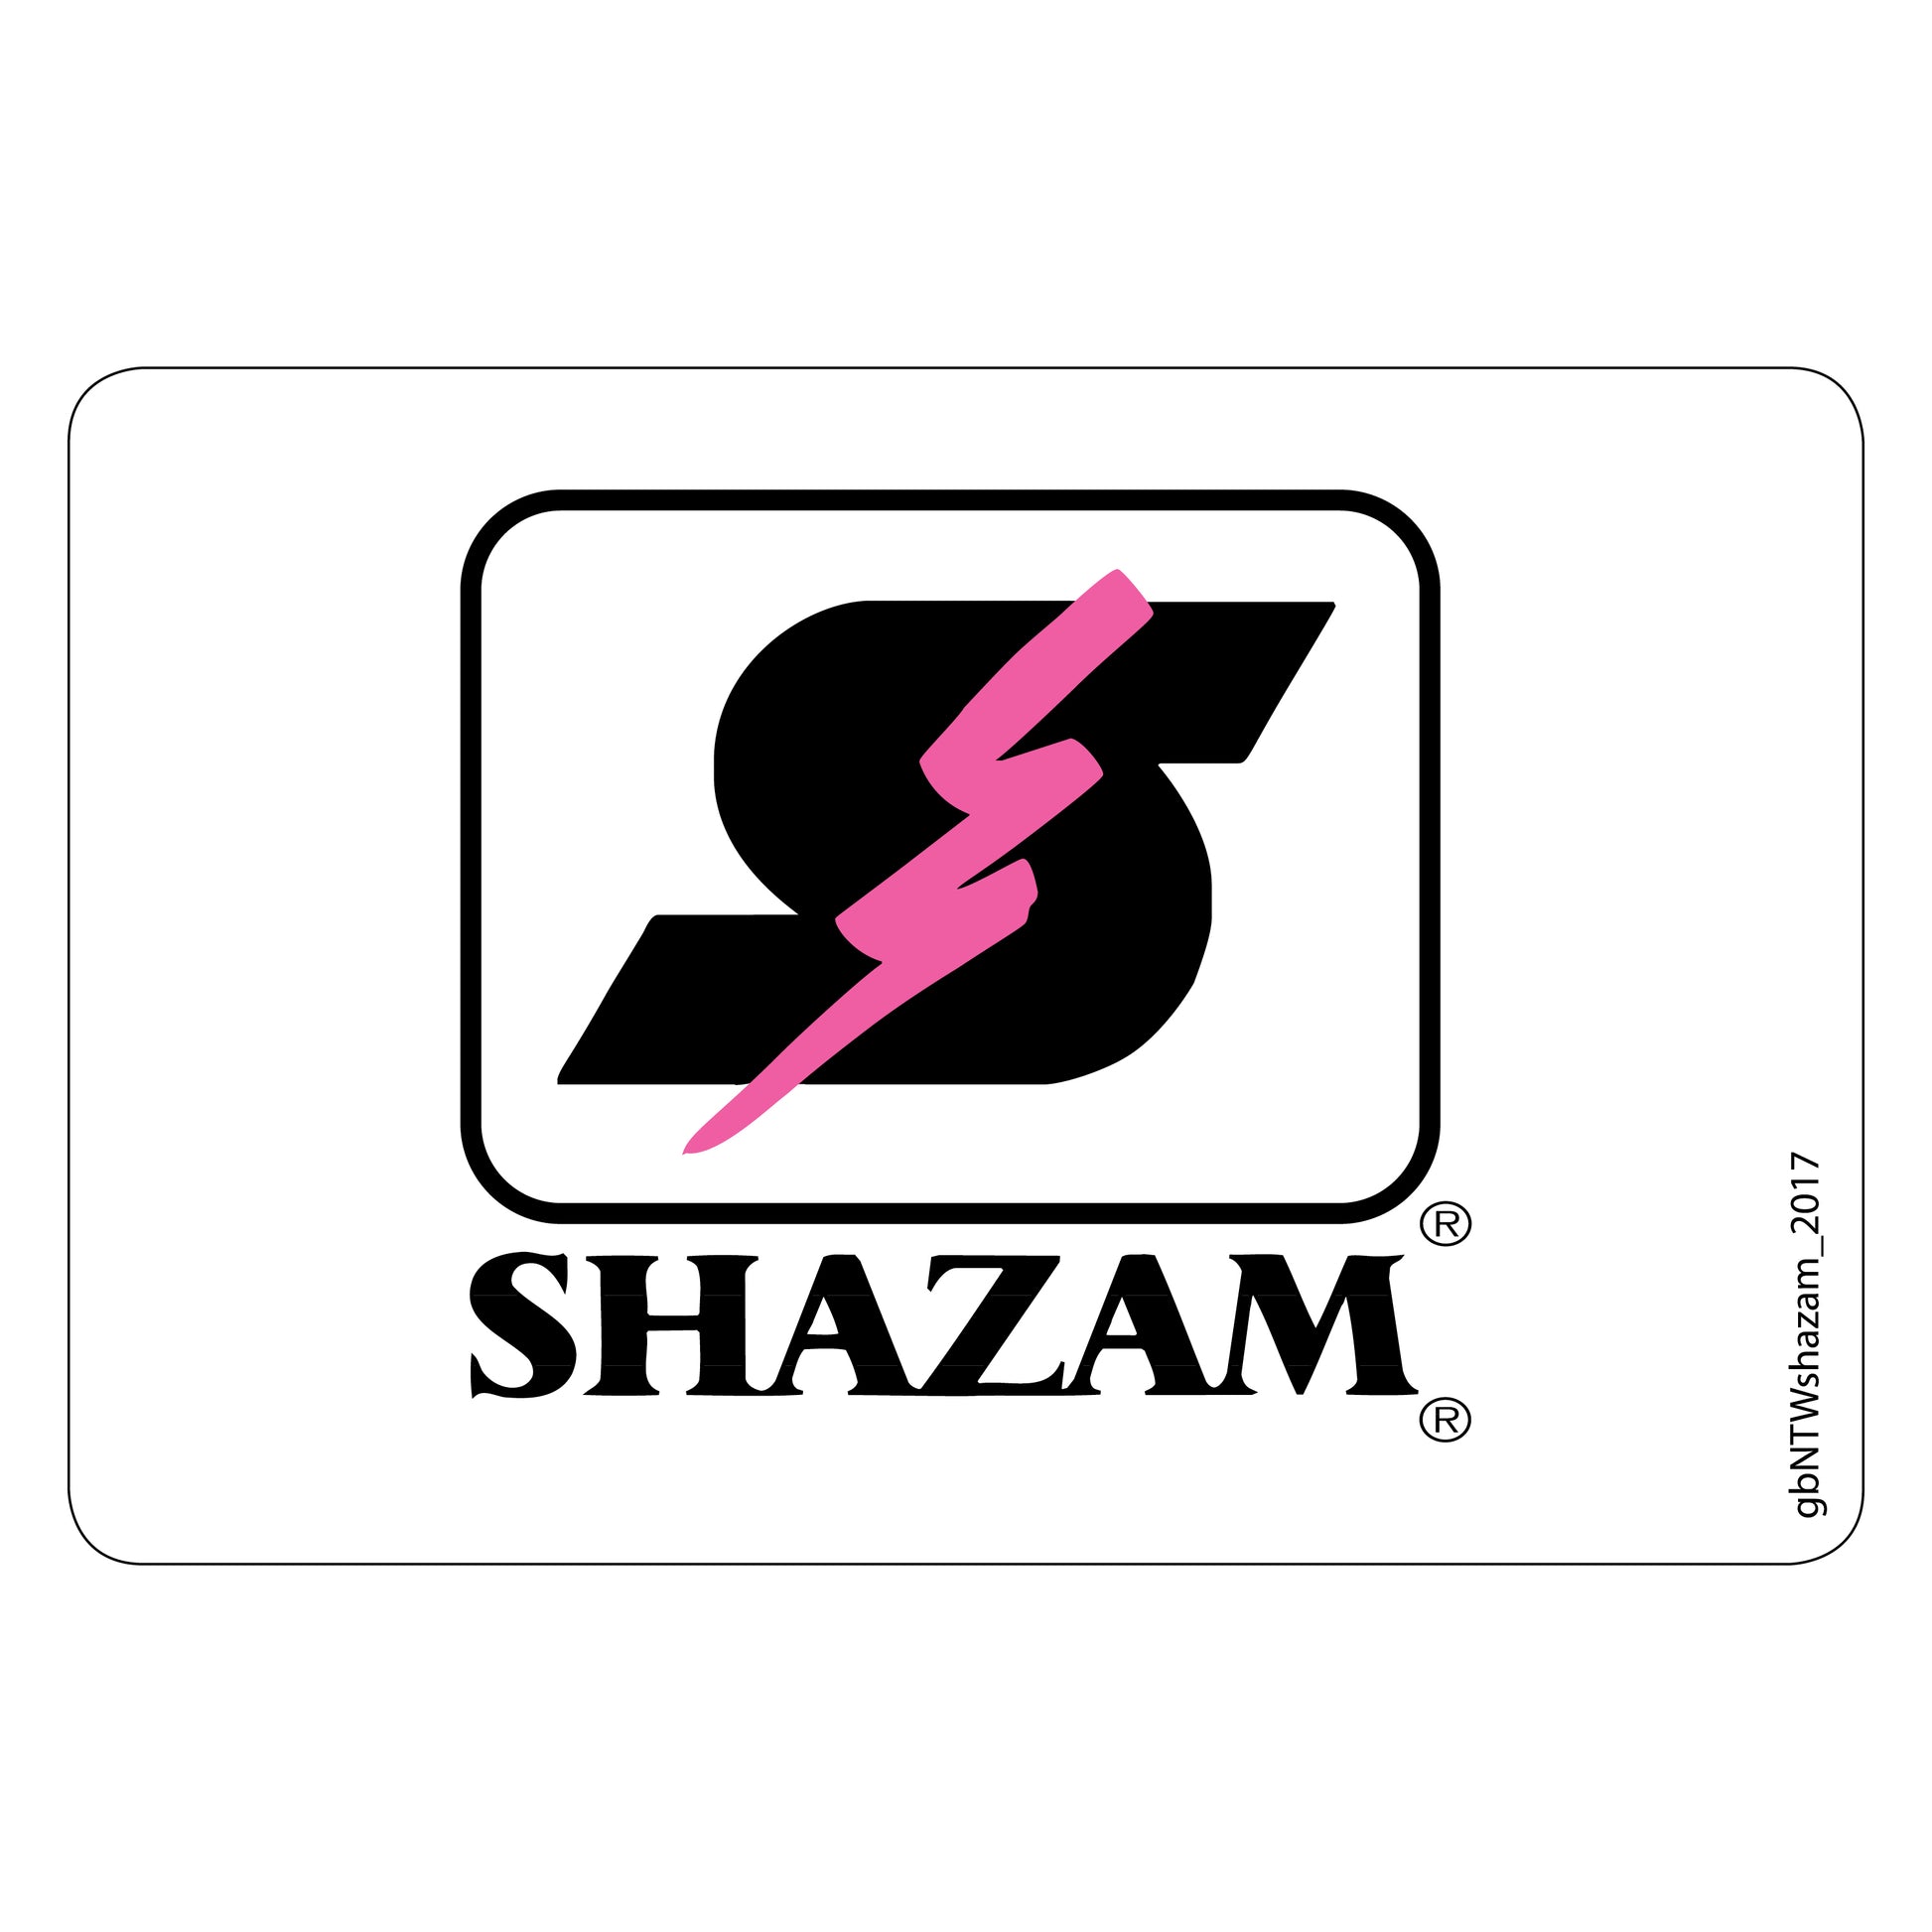 Single Network Decal, Shazam. 3 inches by 2 inches in size. 